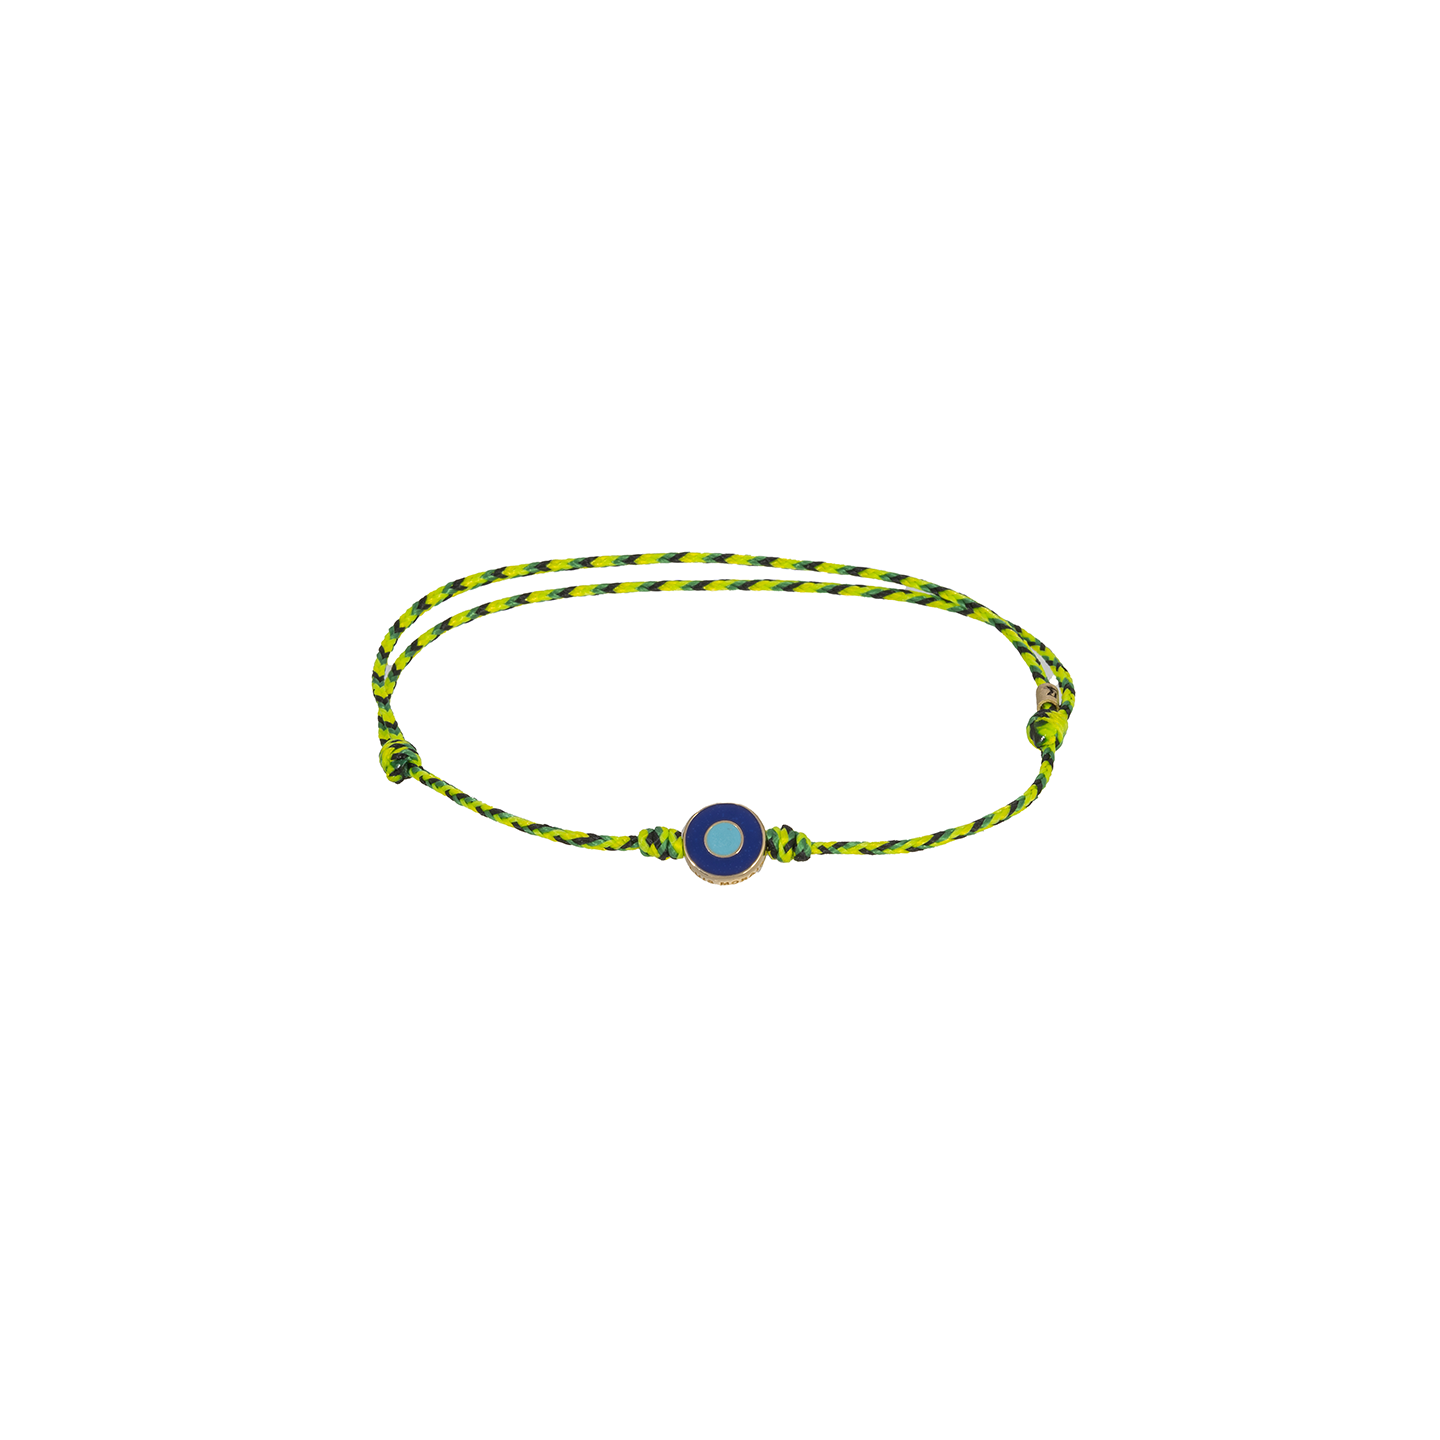 Luis Morais Small Disk with Recessed Double Enameled Green and Turquoise Evil Eye on Cord Bracelet